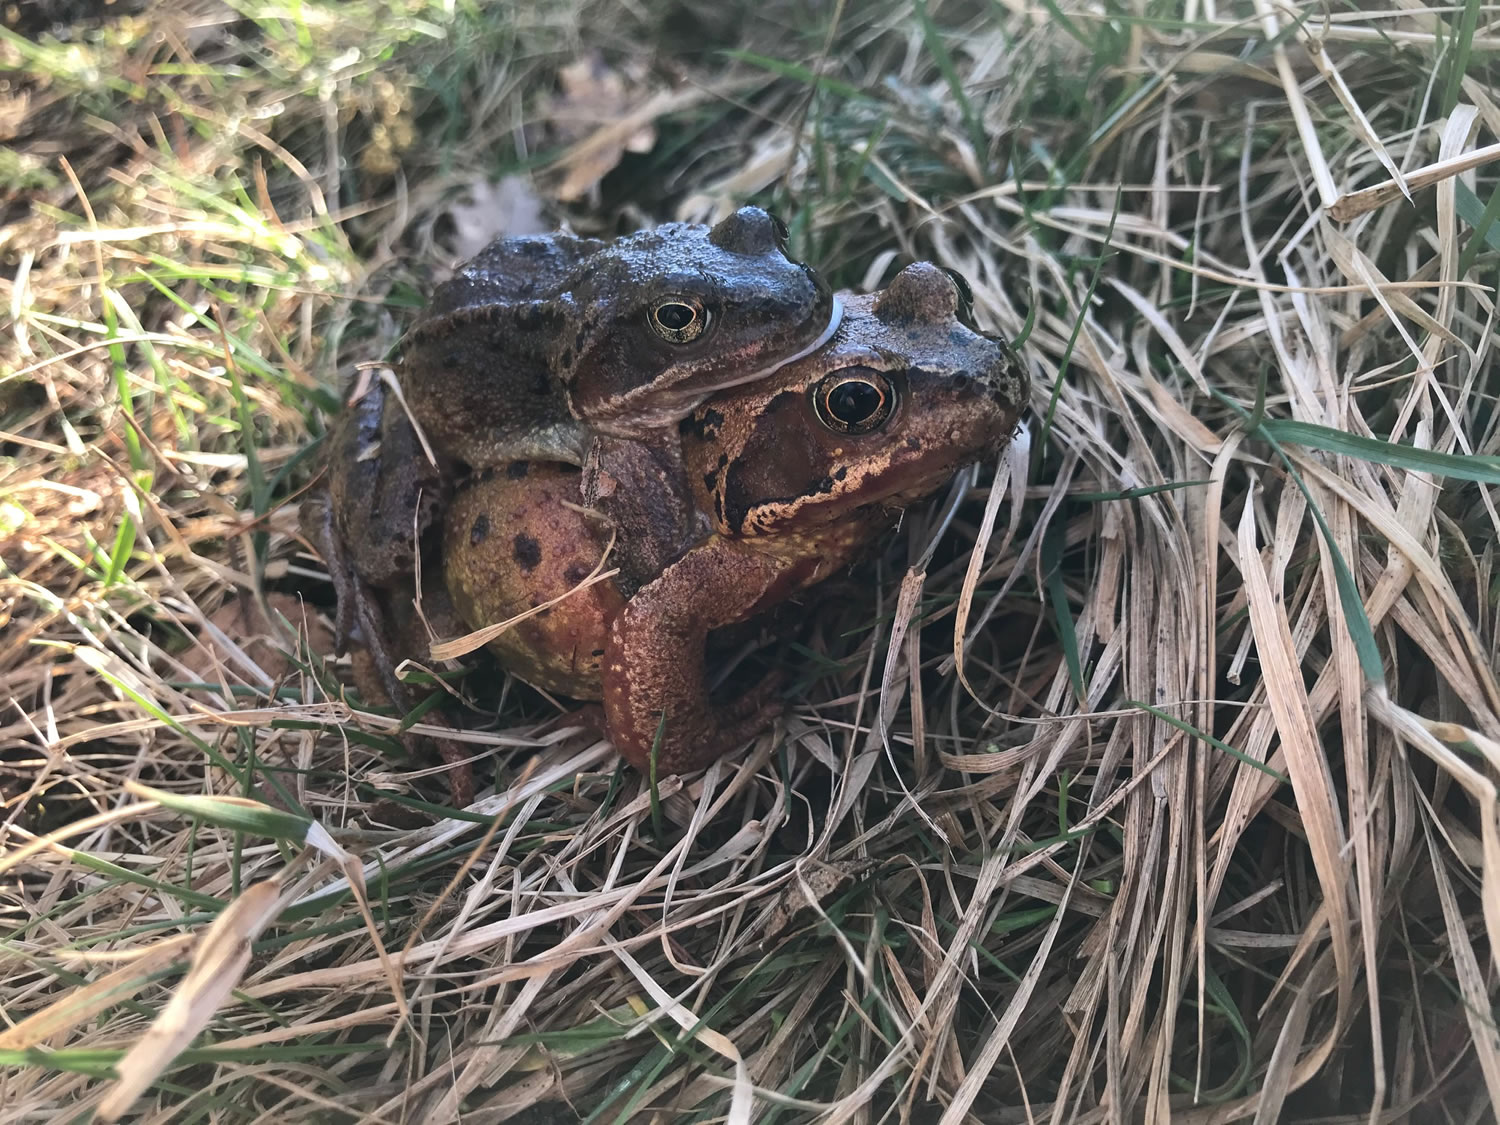 Thursday 4th March 2021 – Frogs in Spring